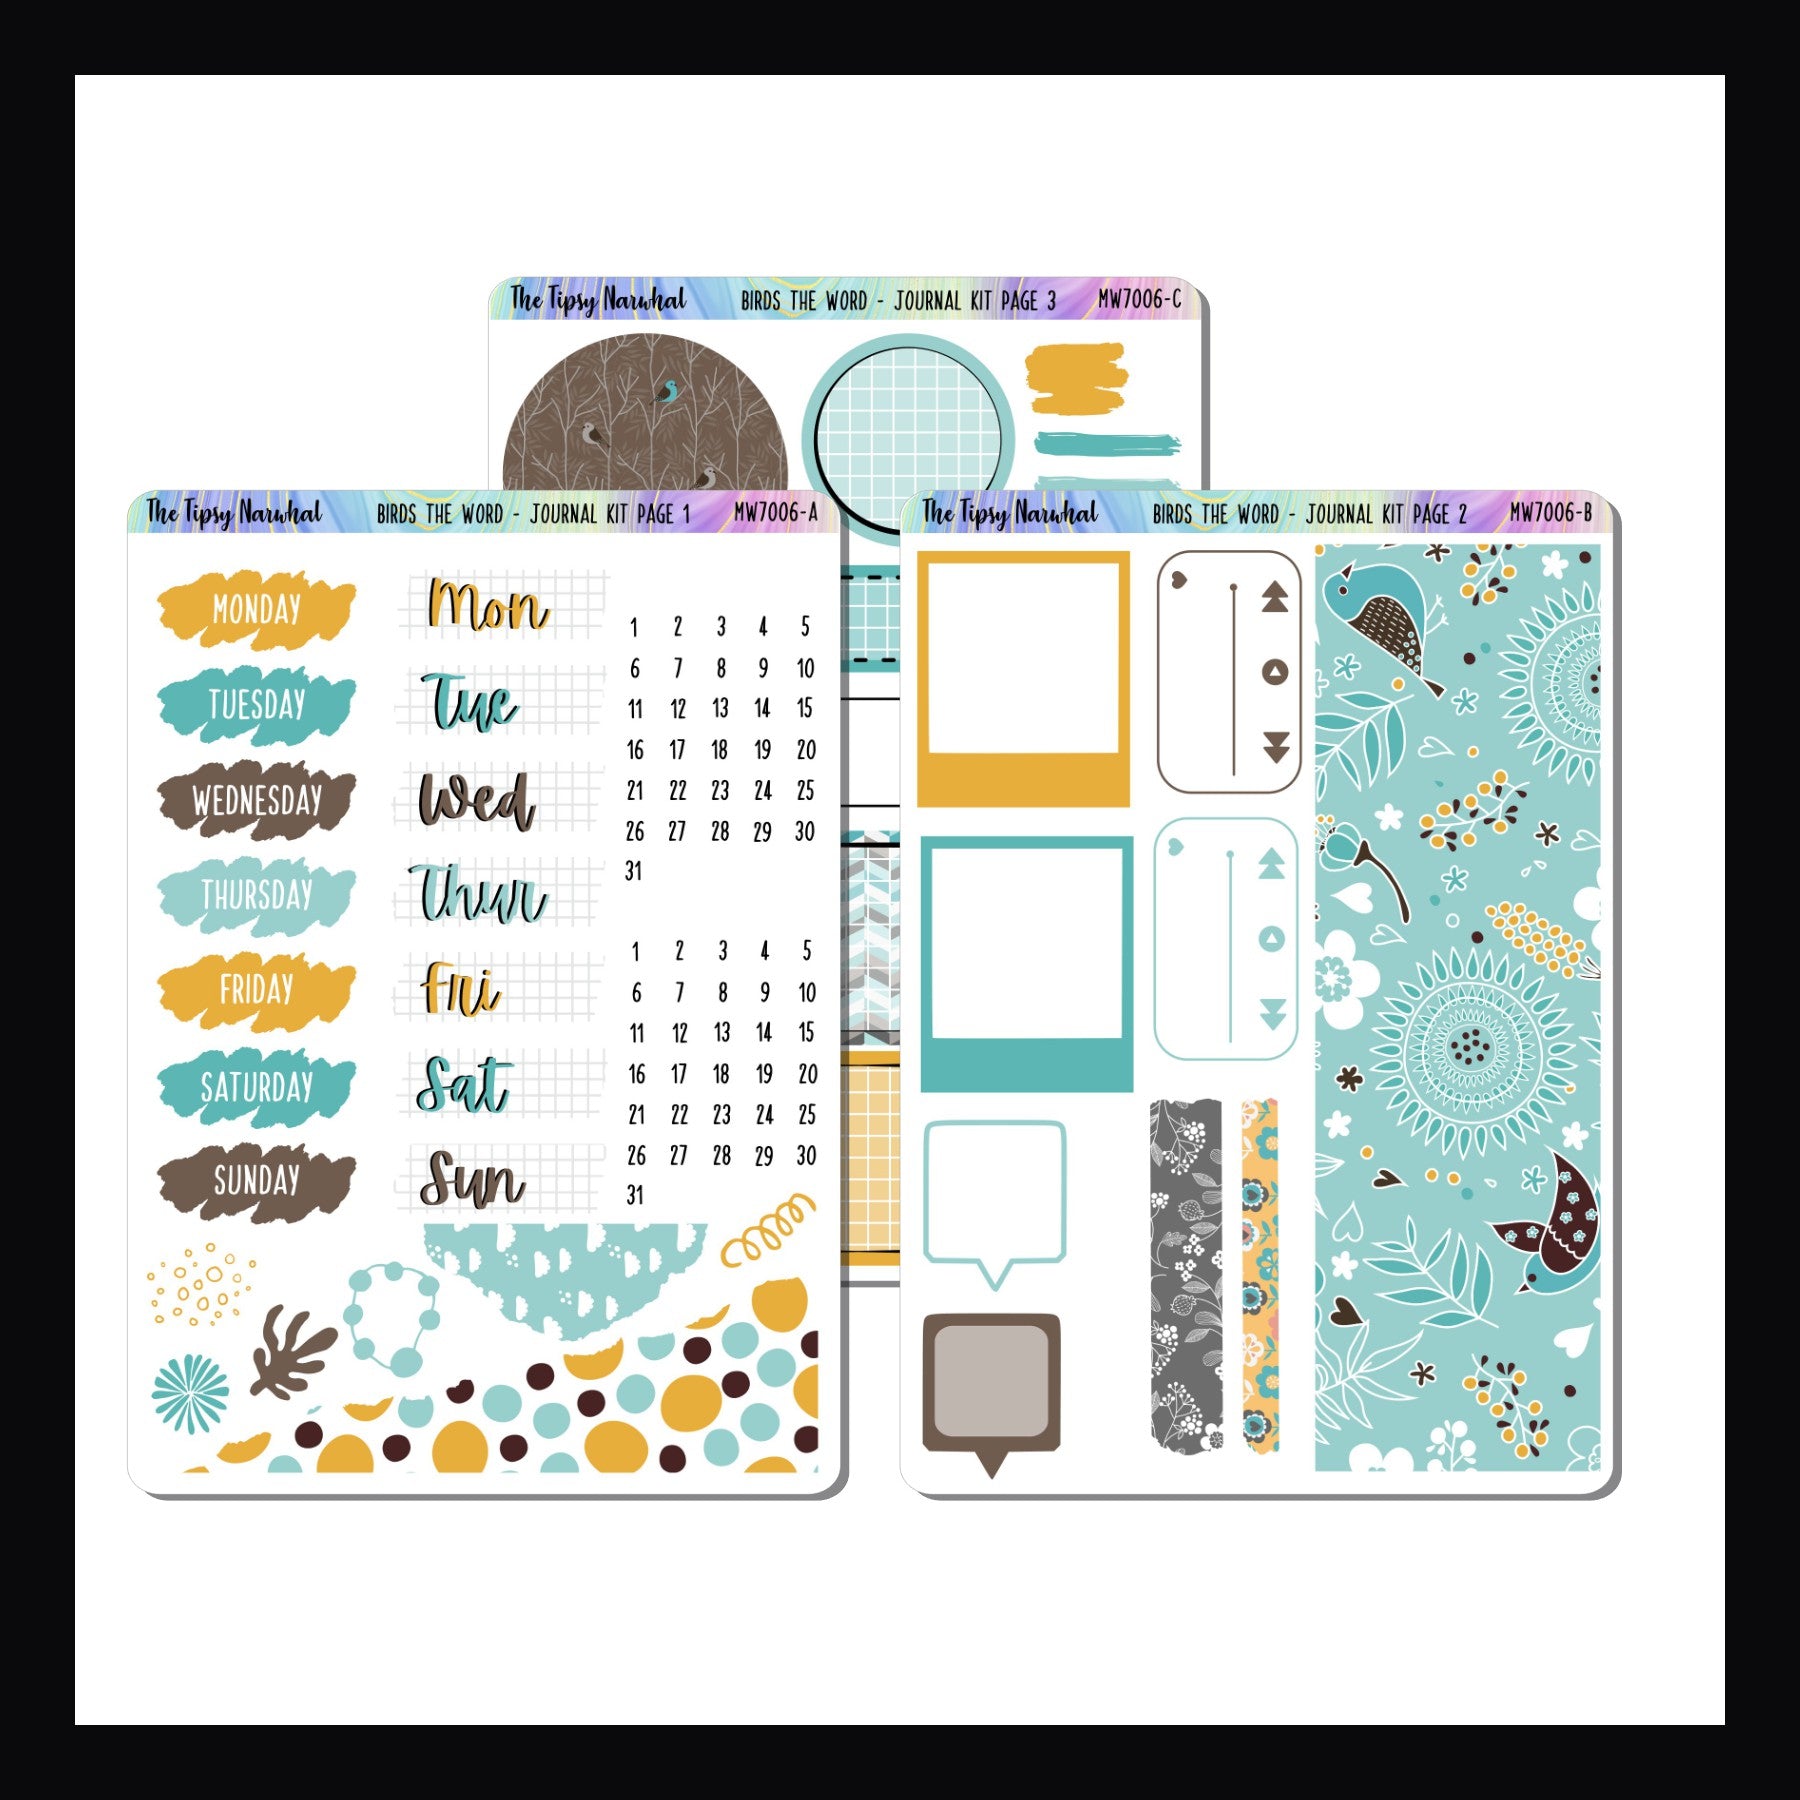 Birds the Word Journal Kit is a 3 page sticker kit focusing on decorative elements to use in various journals.   The theme of this kit is flowers and birds and features a bold color palettes of yellows, blues and browns.